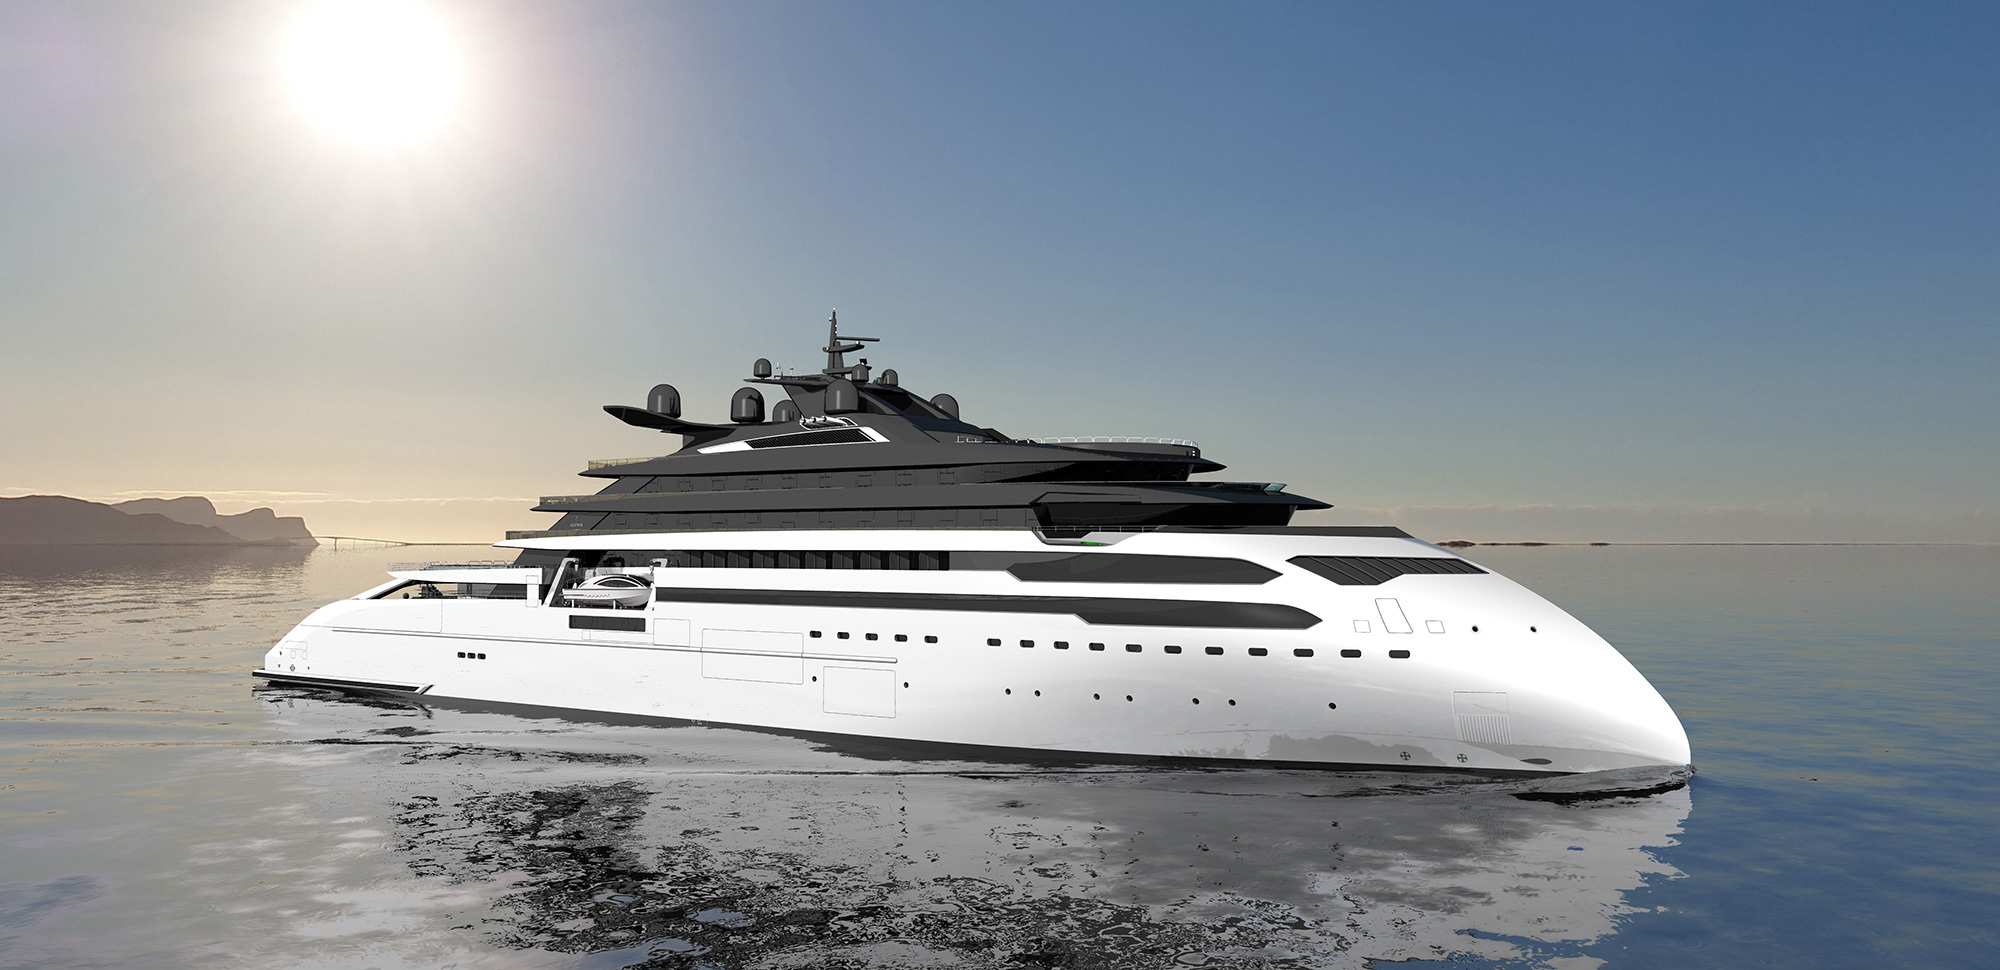 The ULSTEIN CX127 research exploration yacht.